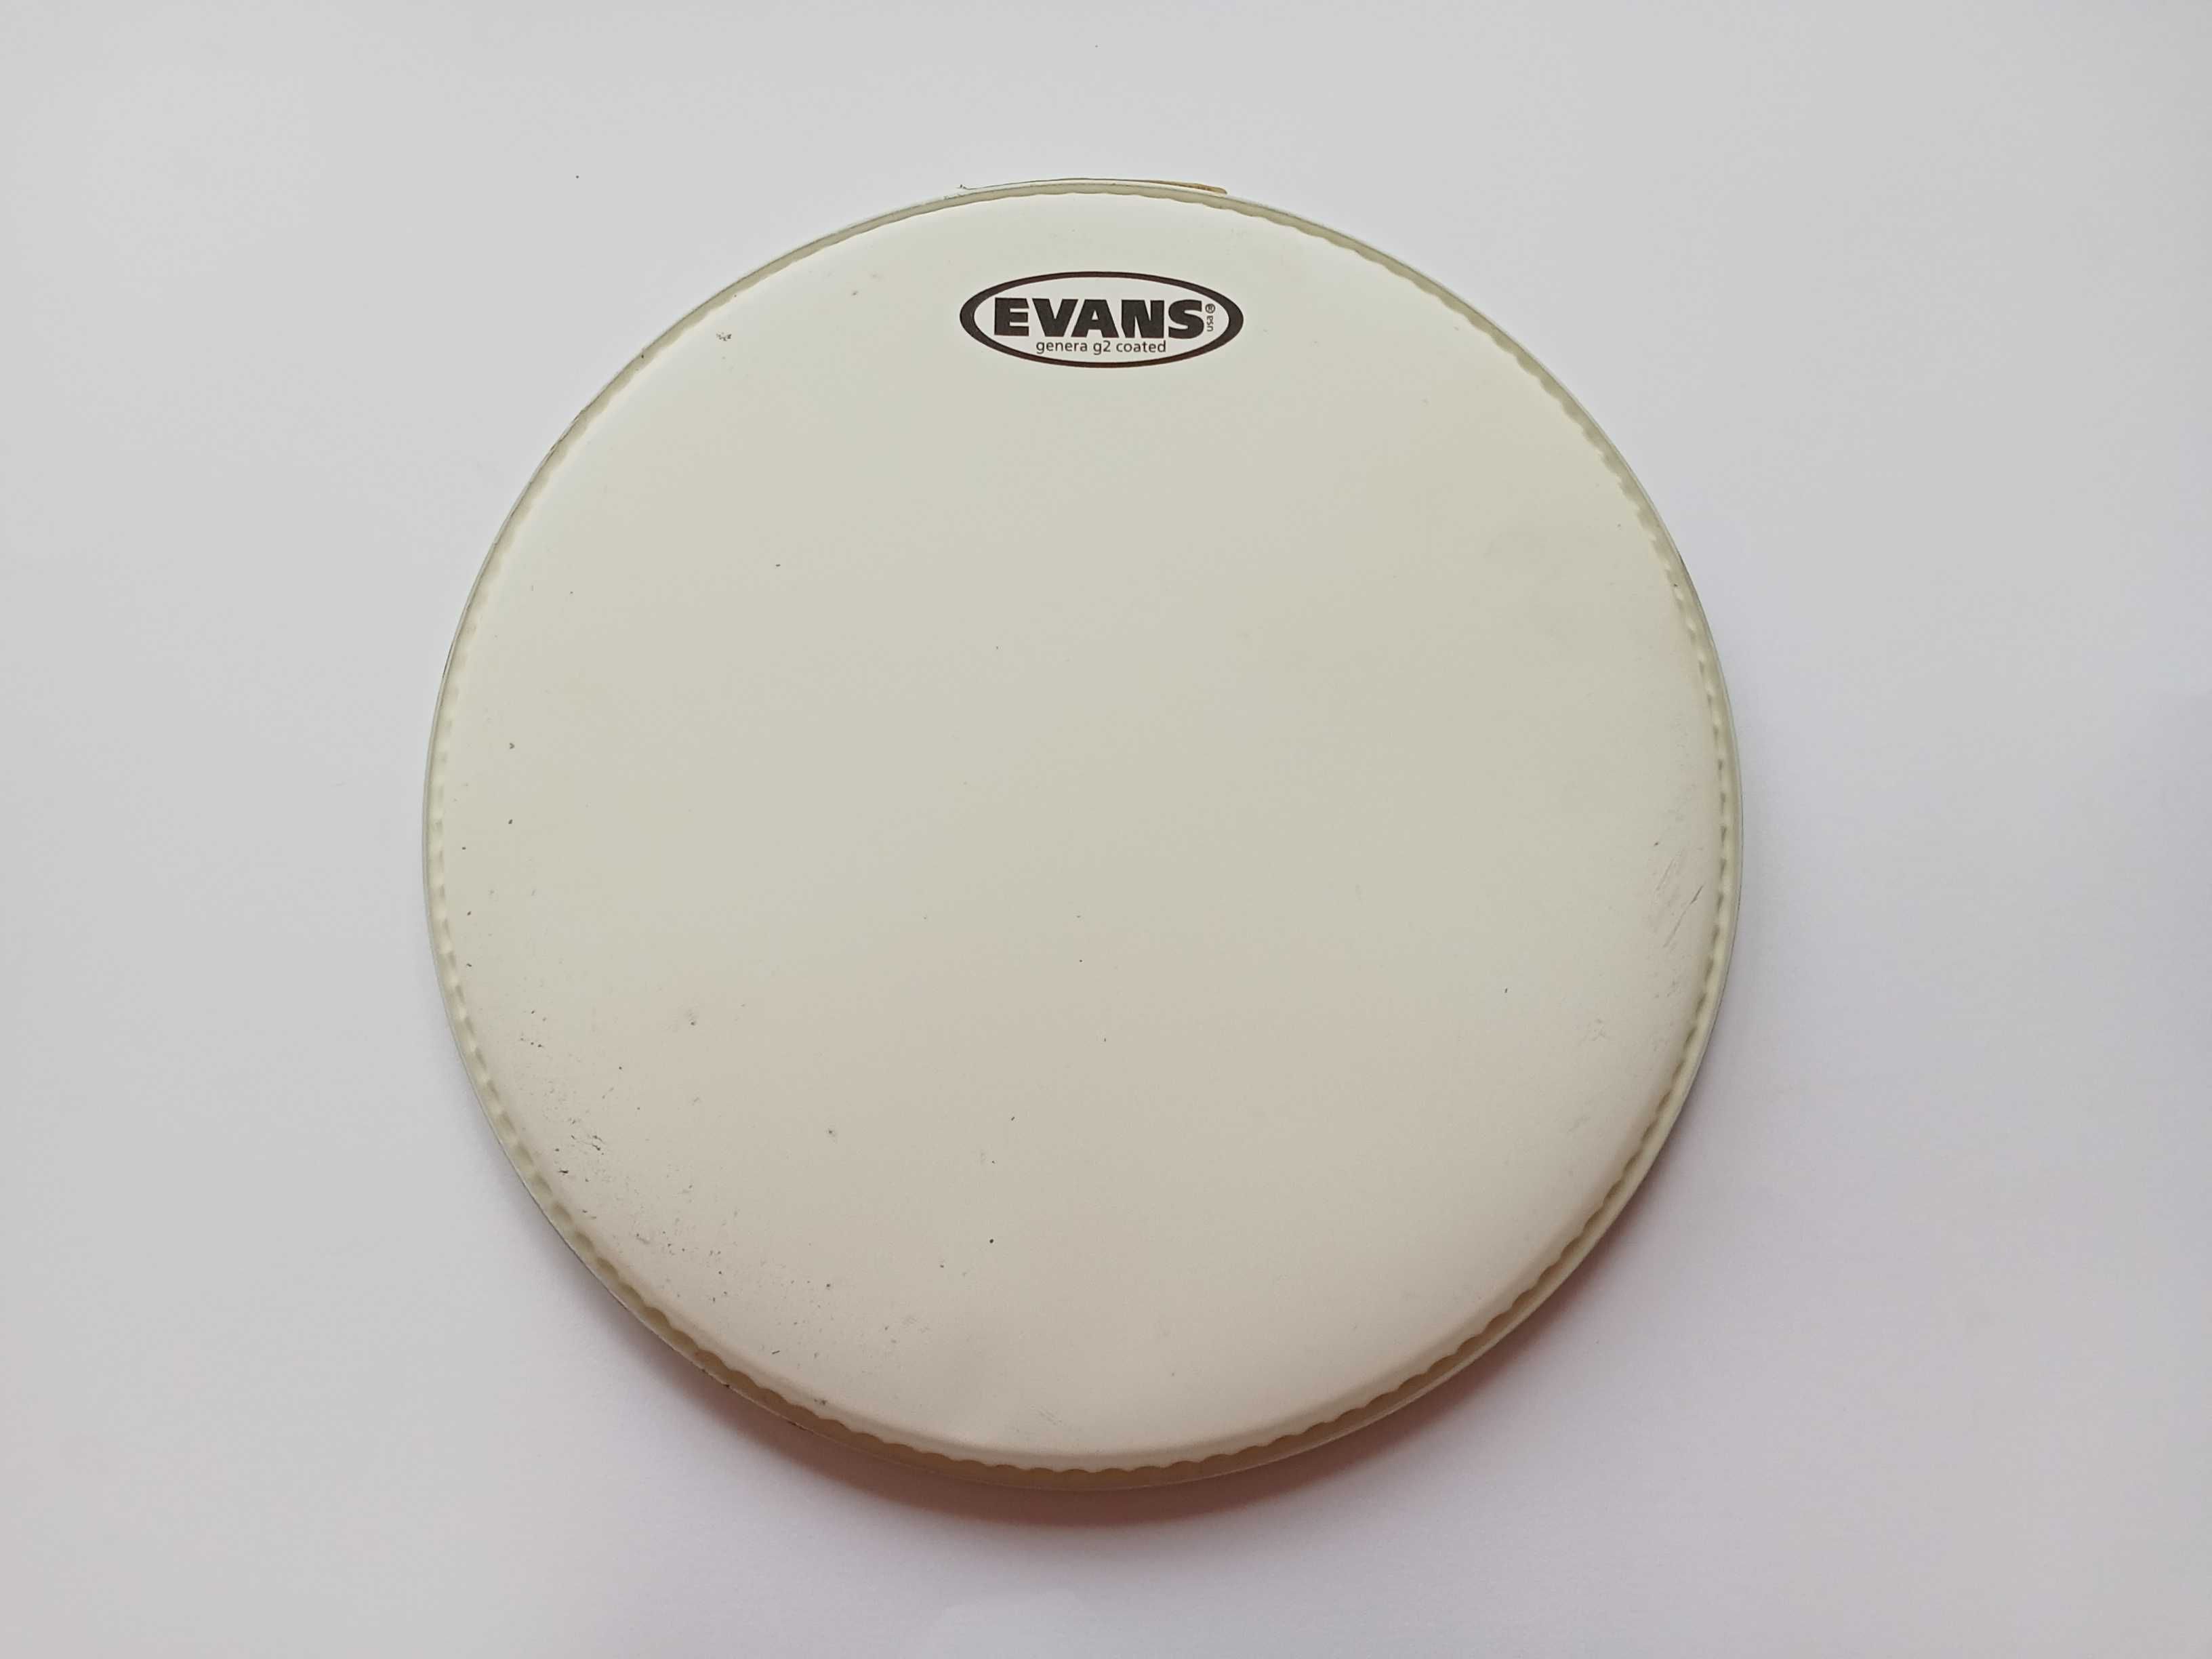 Evans Pele Timbalão 13" G2 Coated